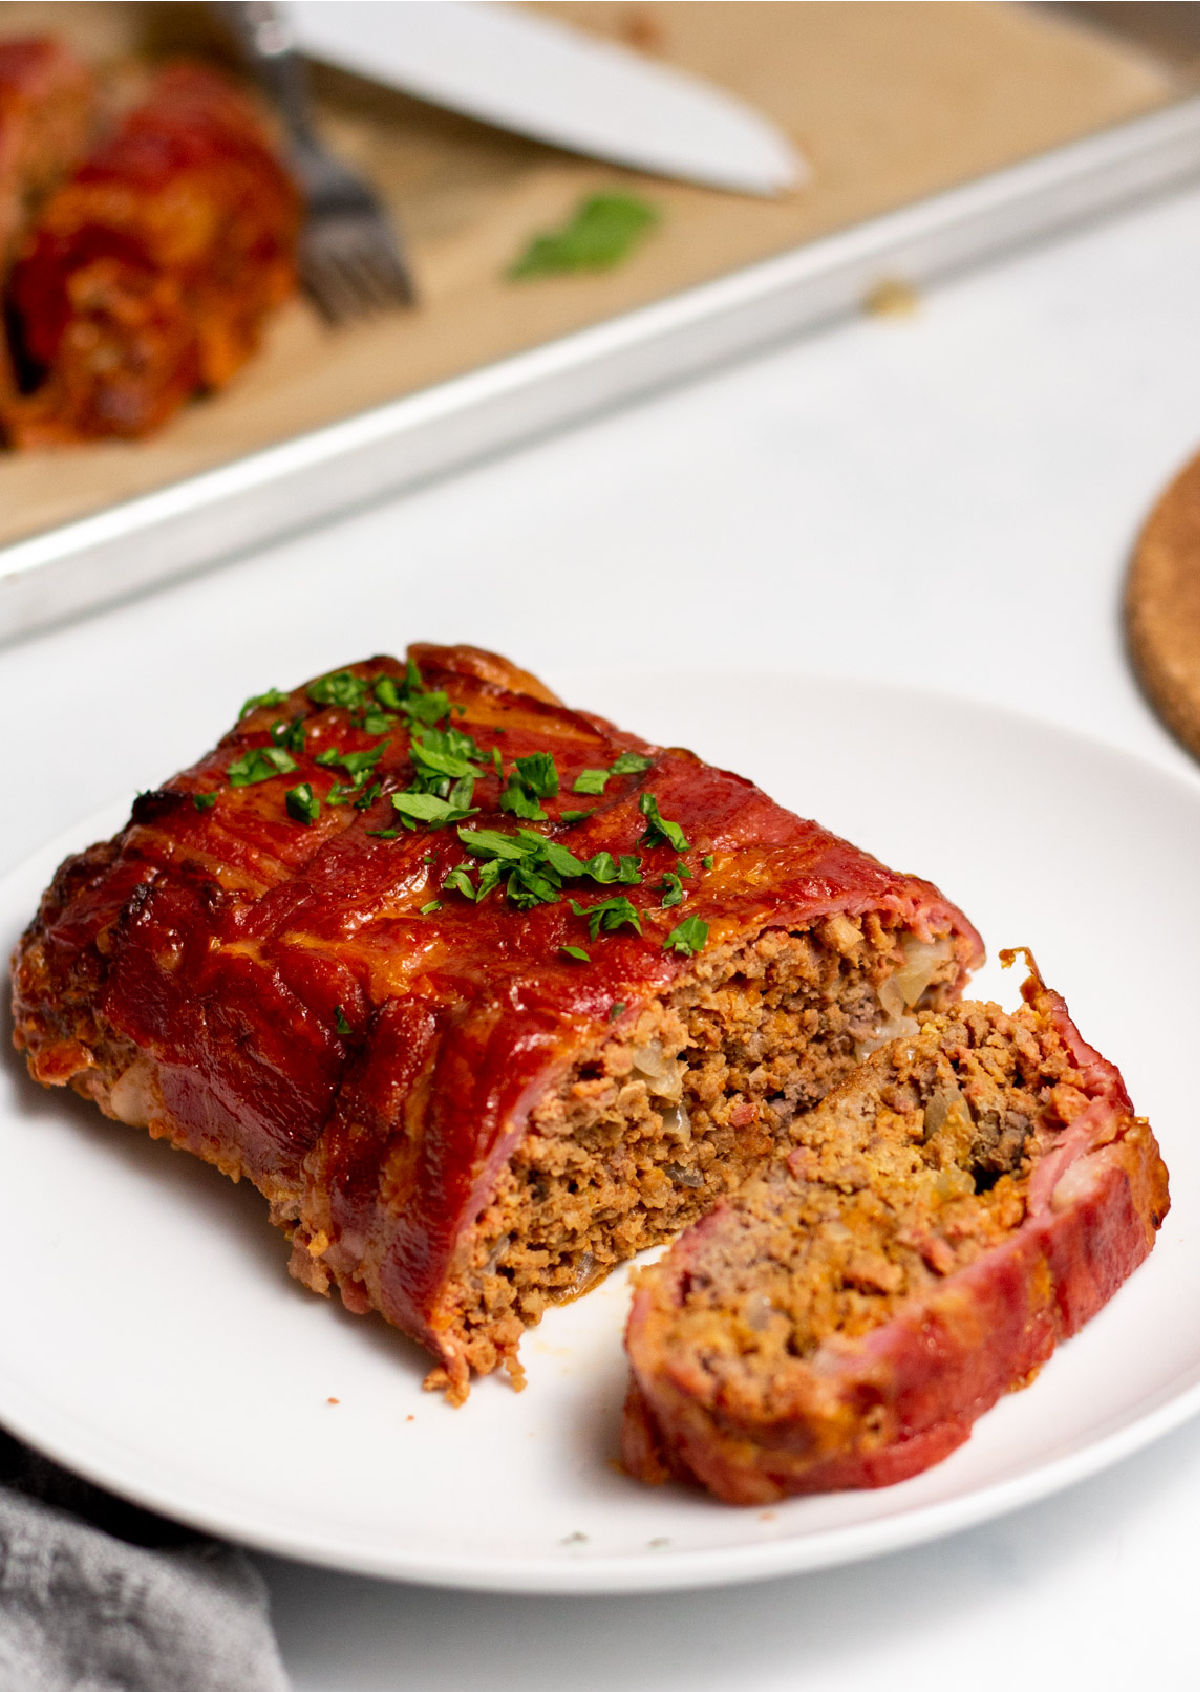 Bacon wrapped meatloaf on a white serving plate.